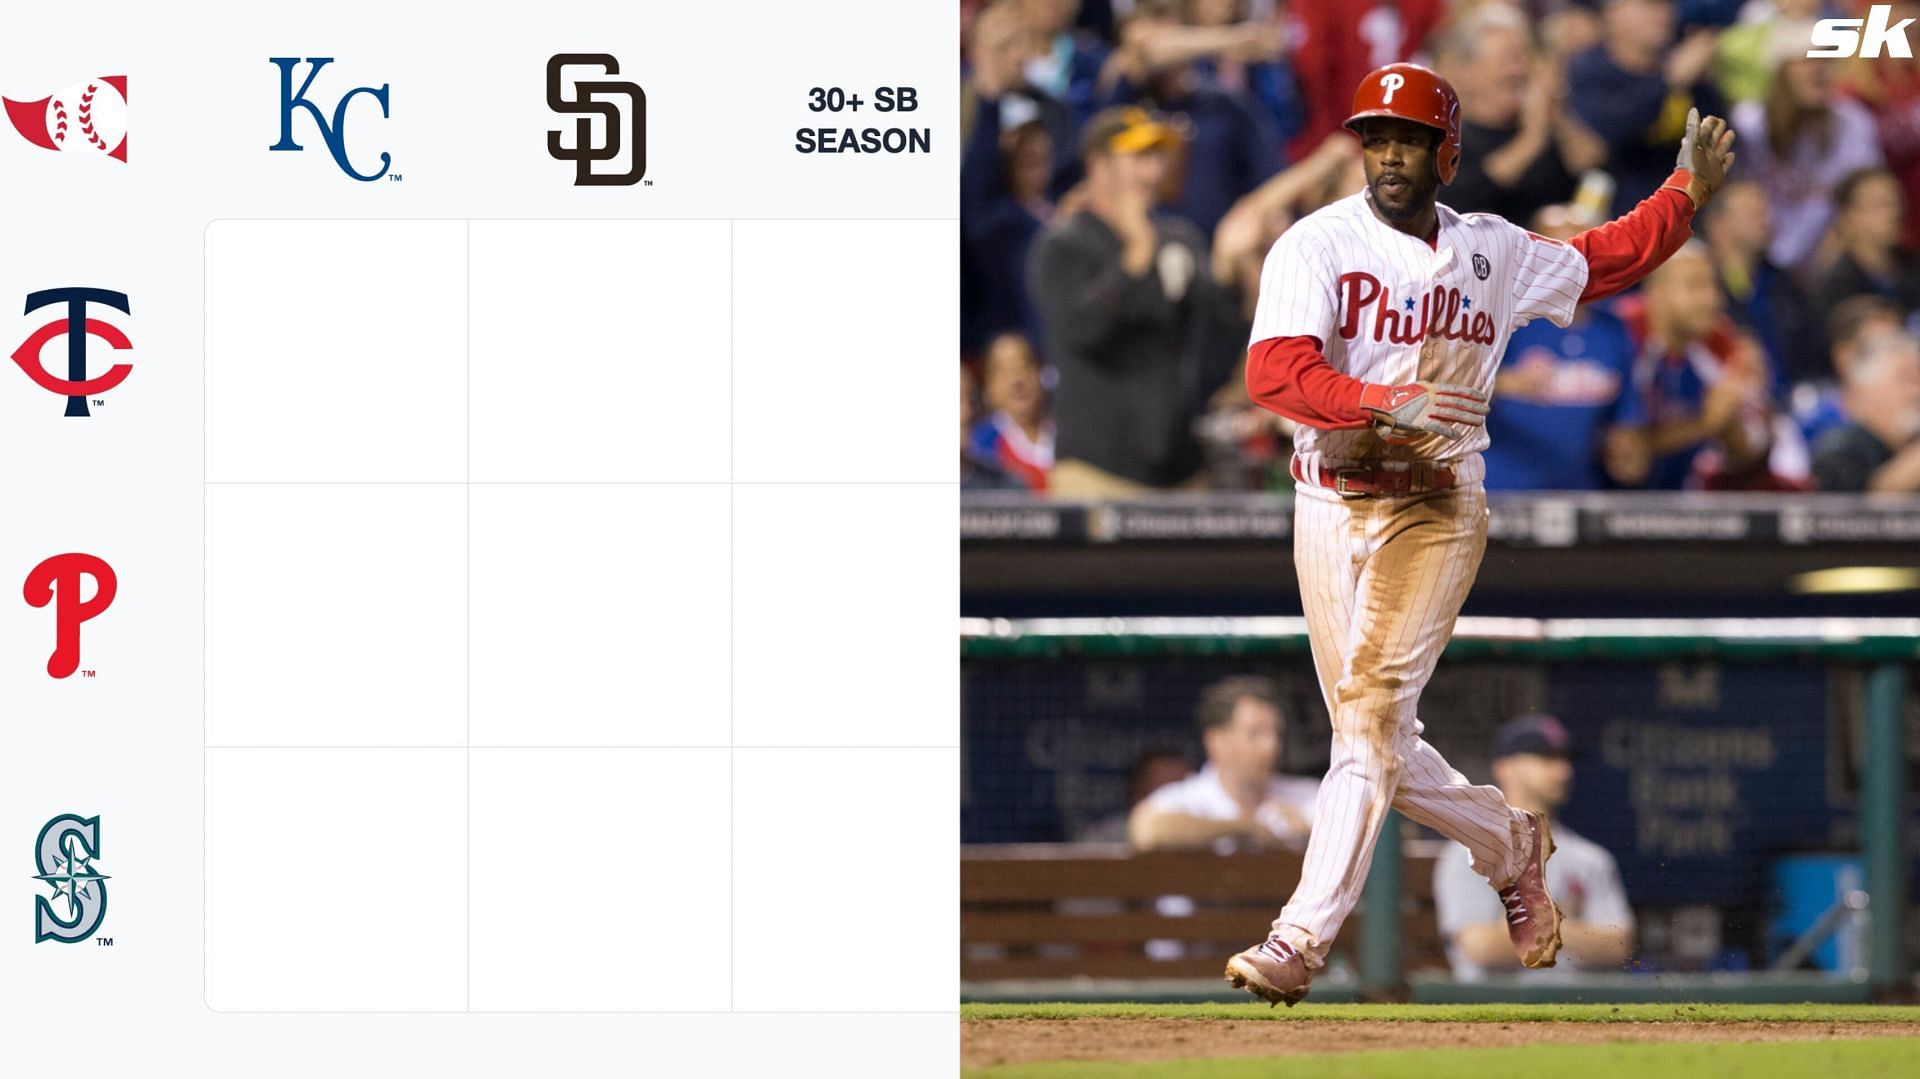 Which Phillies players have recorded 30+ SB in a season? MLB